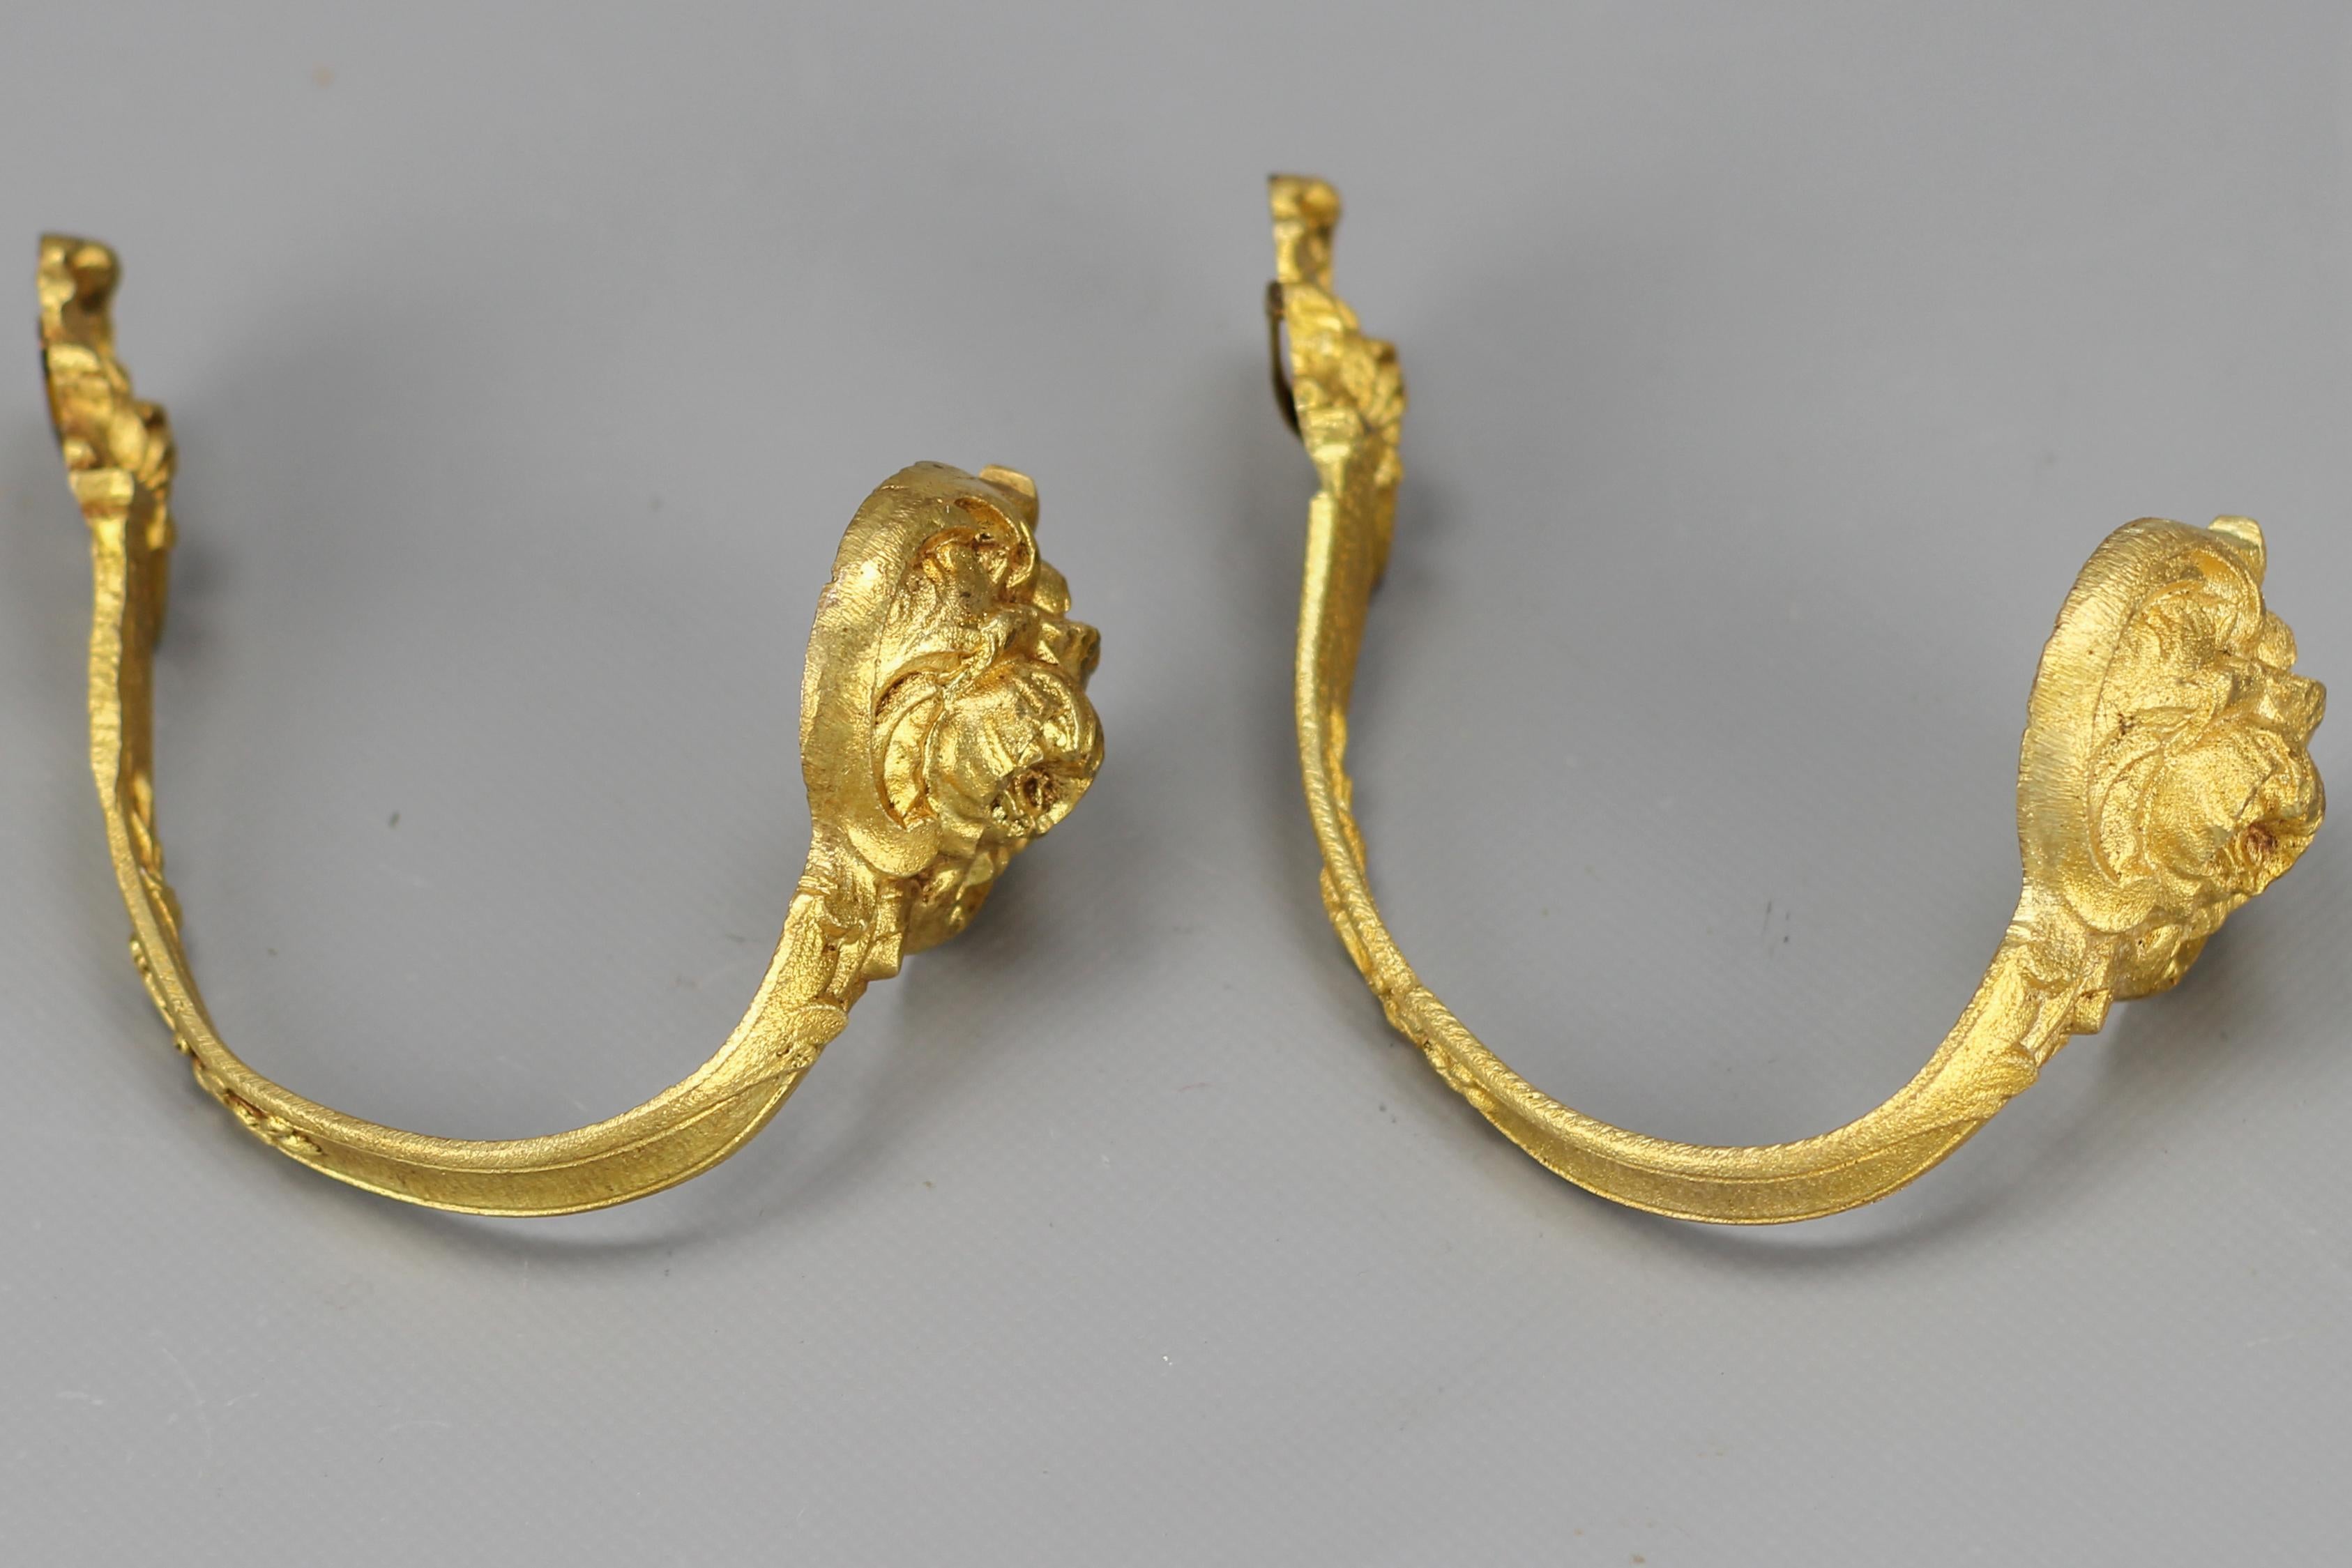 Pair of French Rococo Style Gilt Bronze Curtain Tiebacks or Curtain Holders For Sale 1